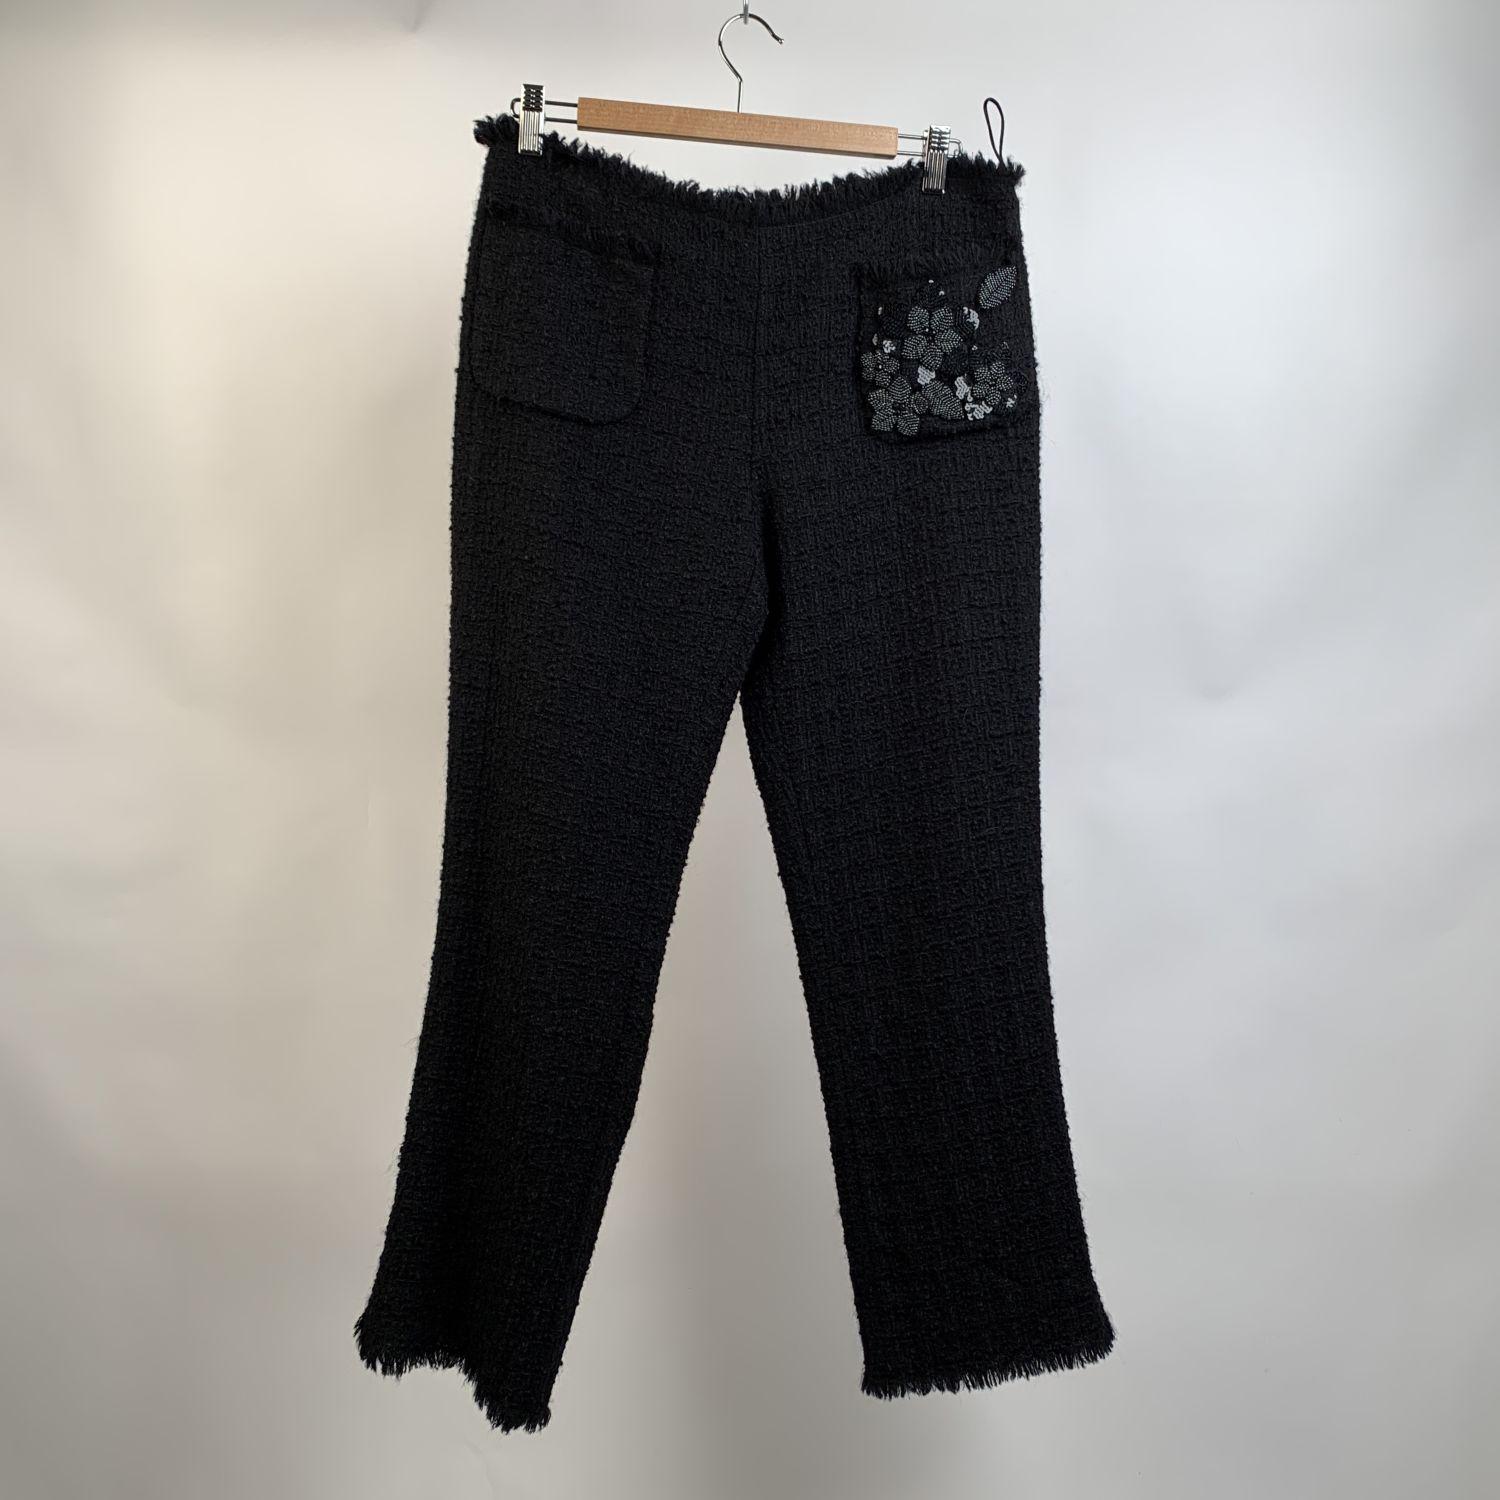 Moschino Cheap & Chic black bouclé pants trousers. They feature front patch pockets and one is embellished with beads. Side zip pocket. Frayed waist and hem. Composition: 97% virgin wool, 3% other fibres. Size: 44 IT, 40 D, 13 GB, 10 USA (it should